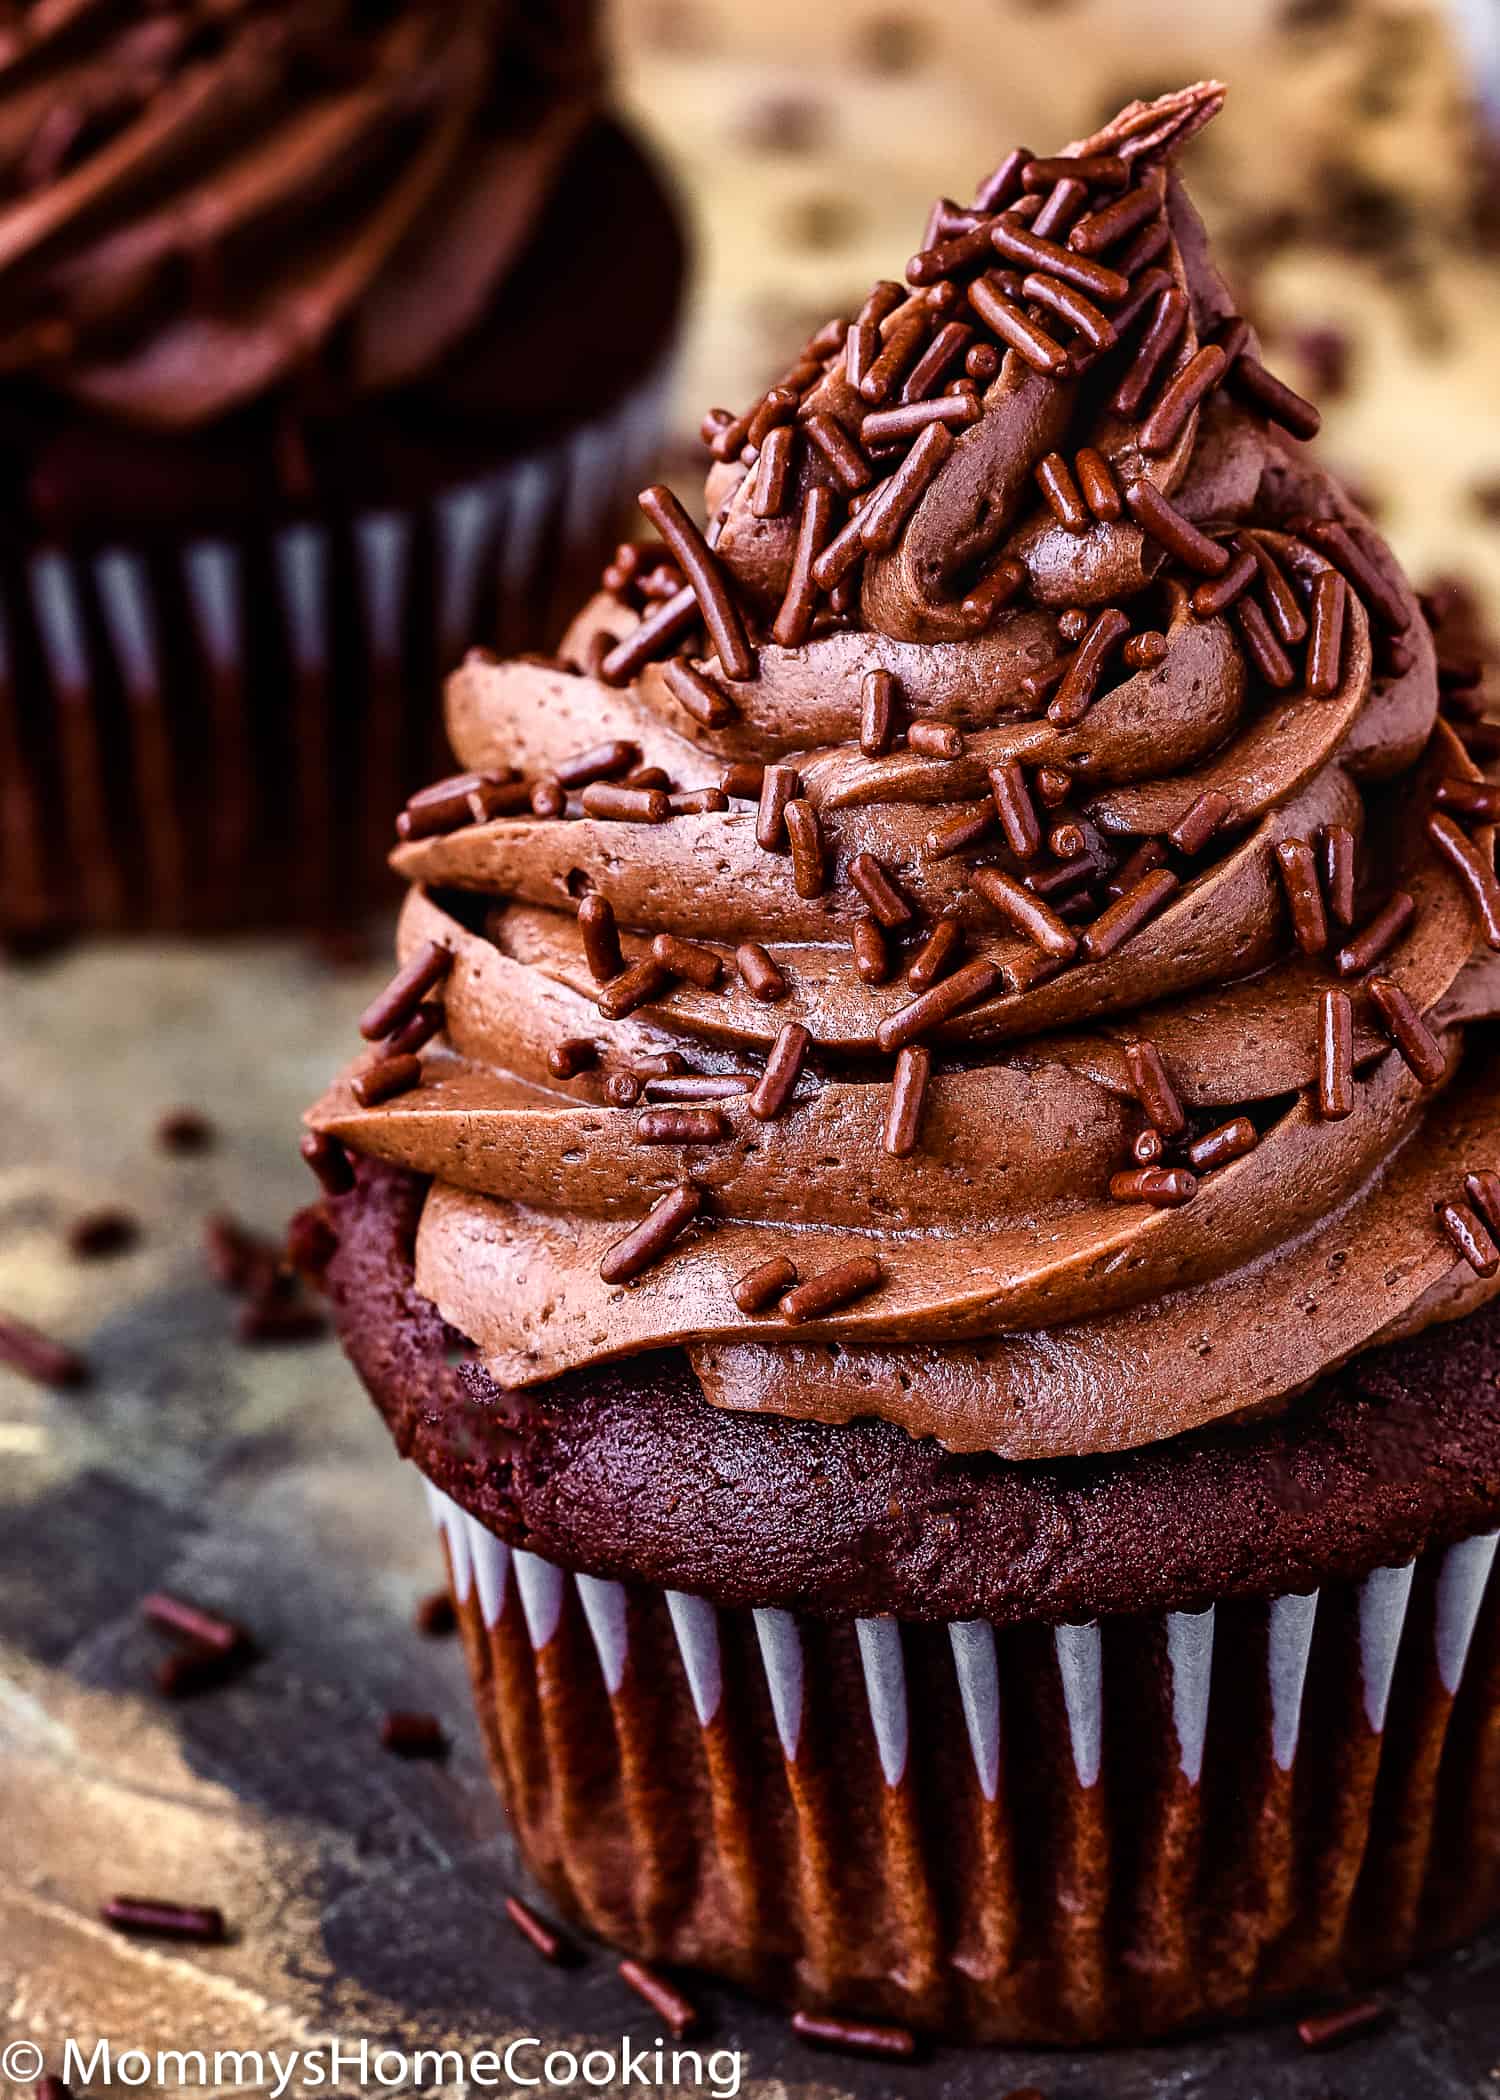 close-up of an Eggless Chocolate Cupcake with chocolate frosting.